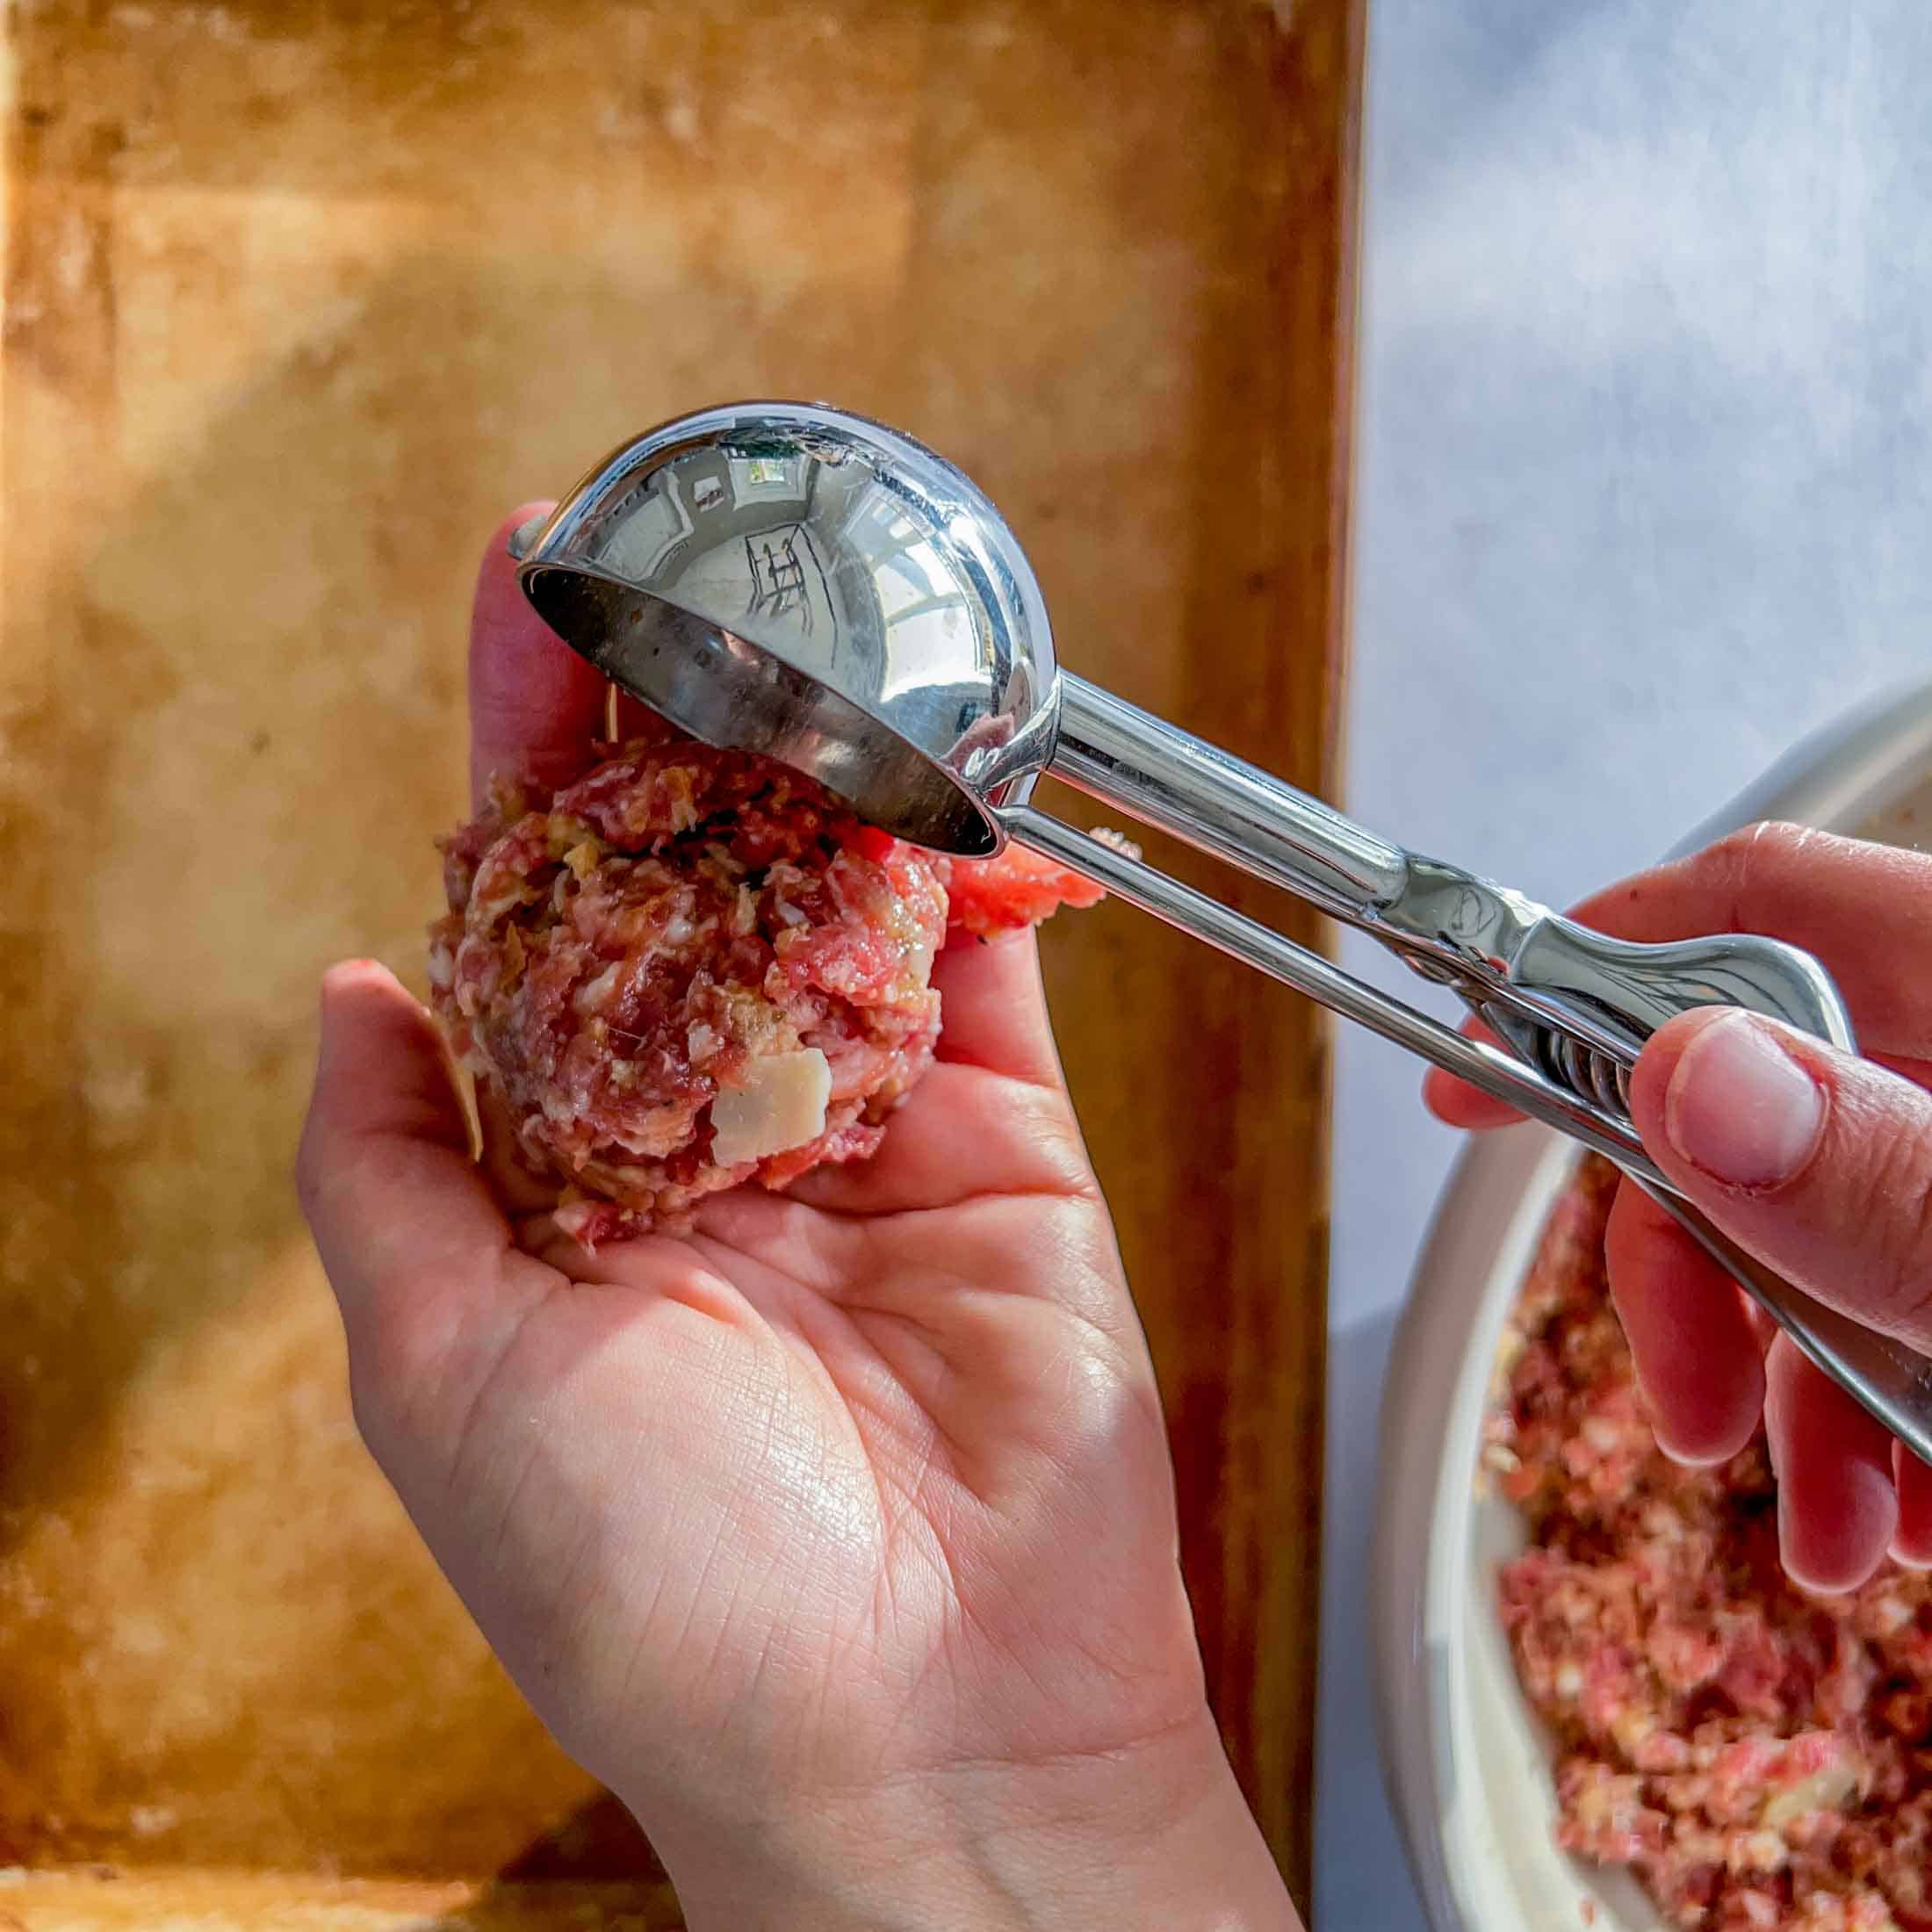 Meatball mixture being dropped into an open palm.